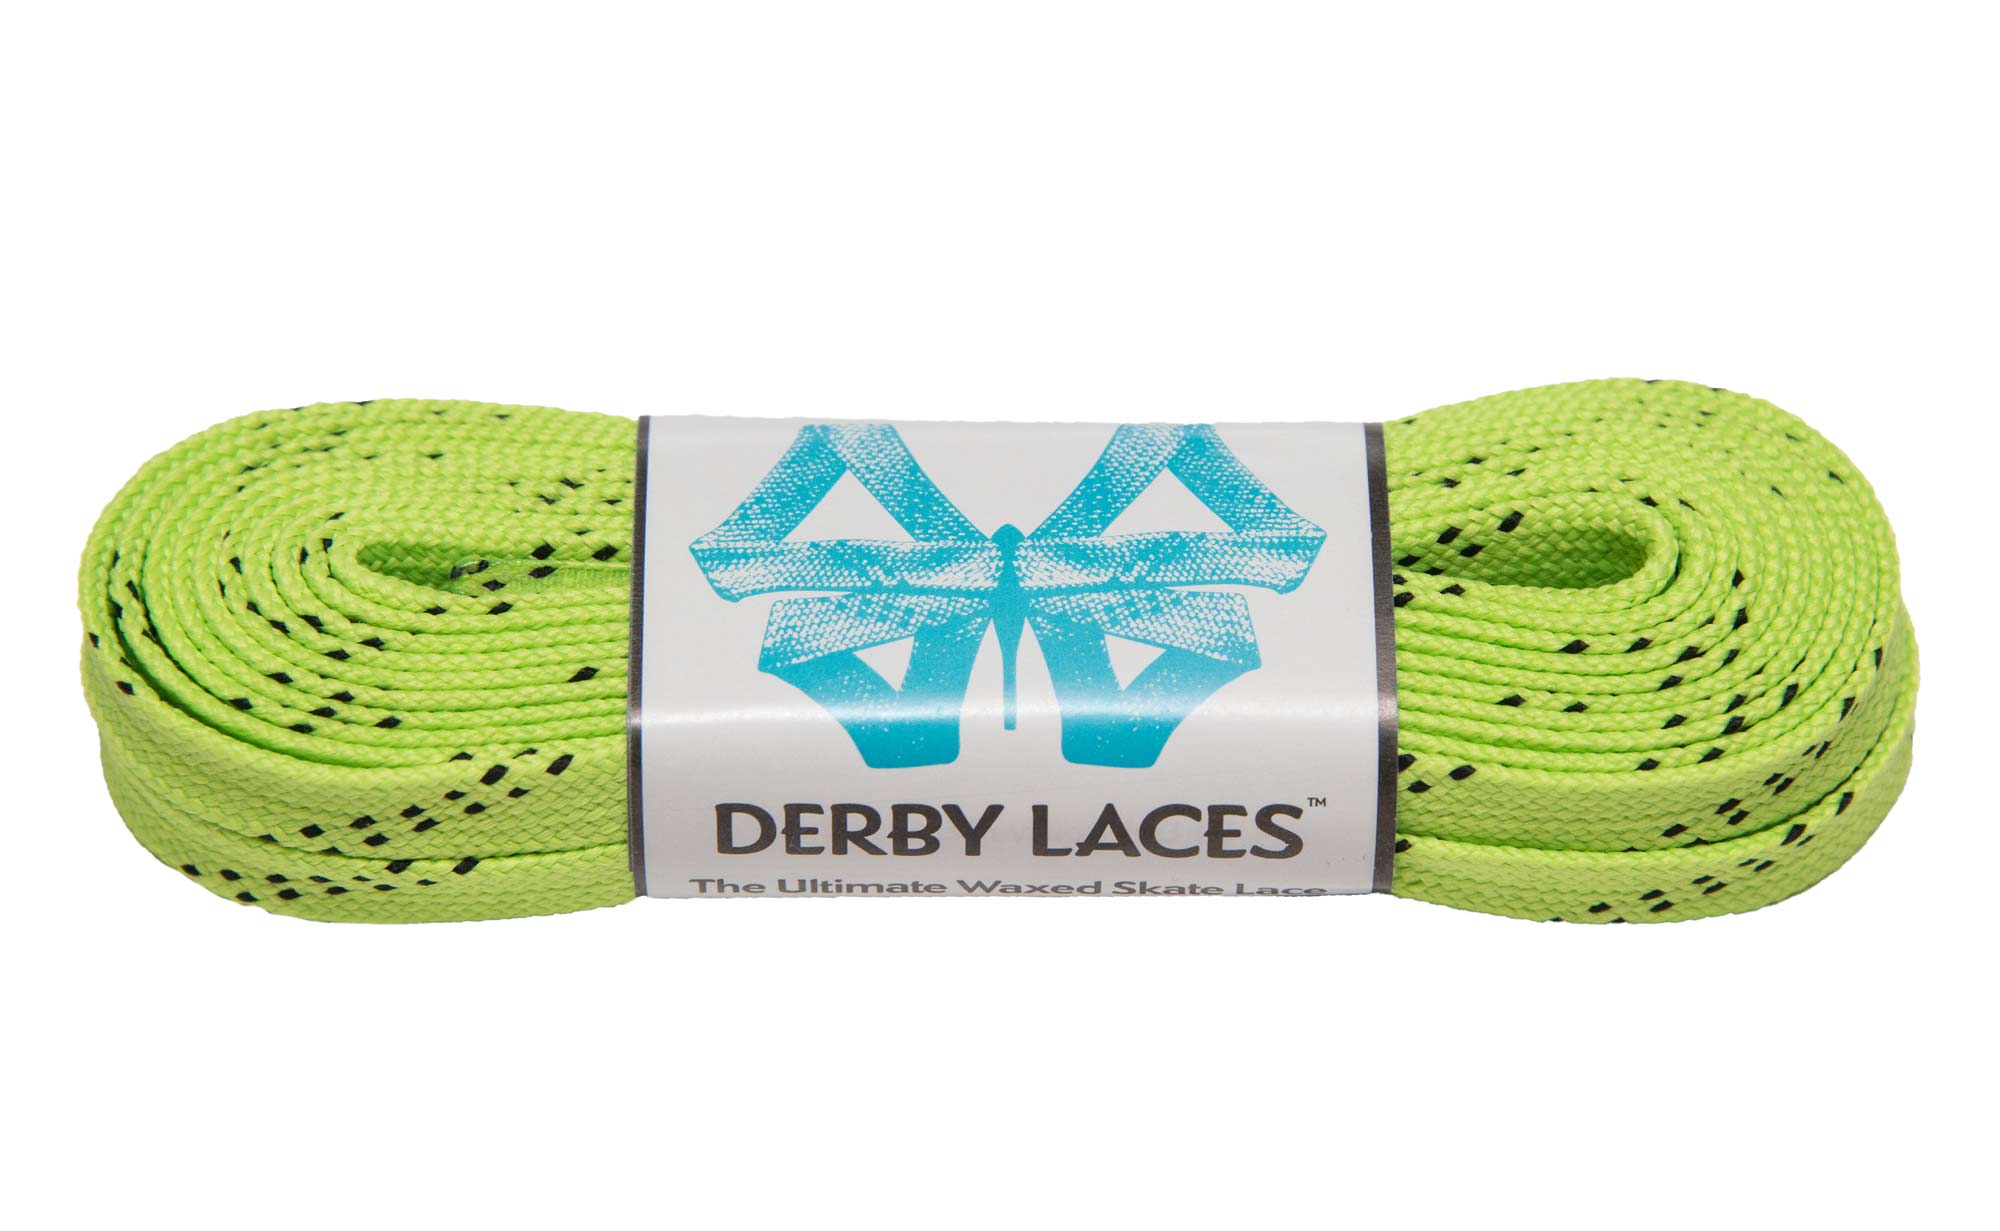 60 Inch Waxed Skate Lace Hockey and Ice Skates and Boots Derby Laces for Roller Derby